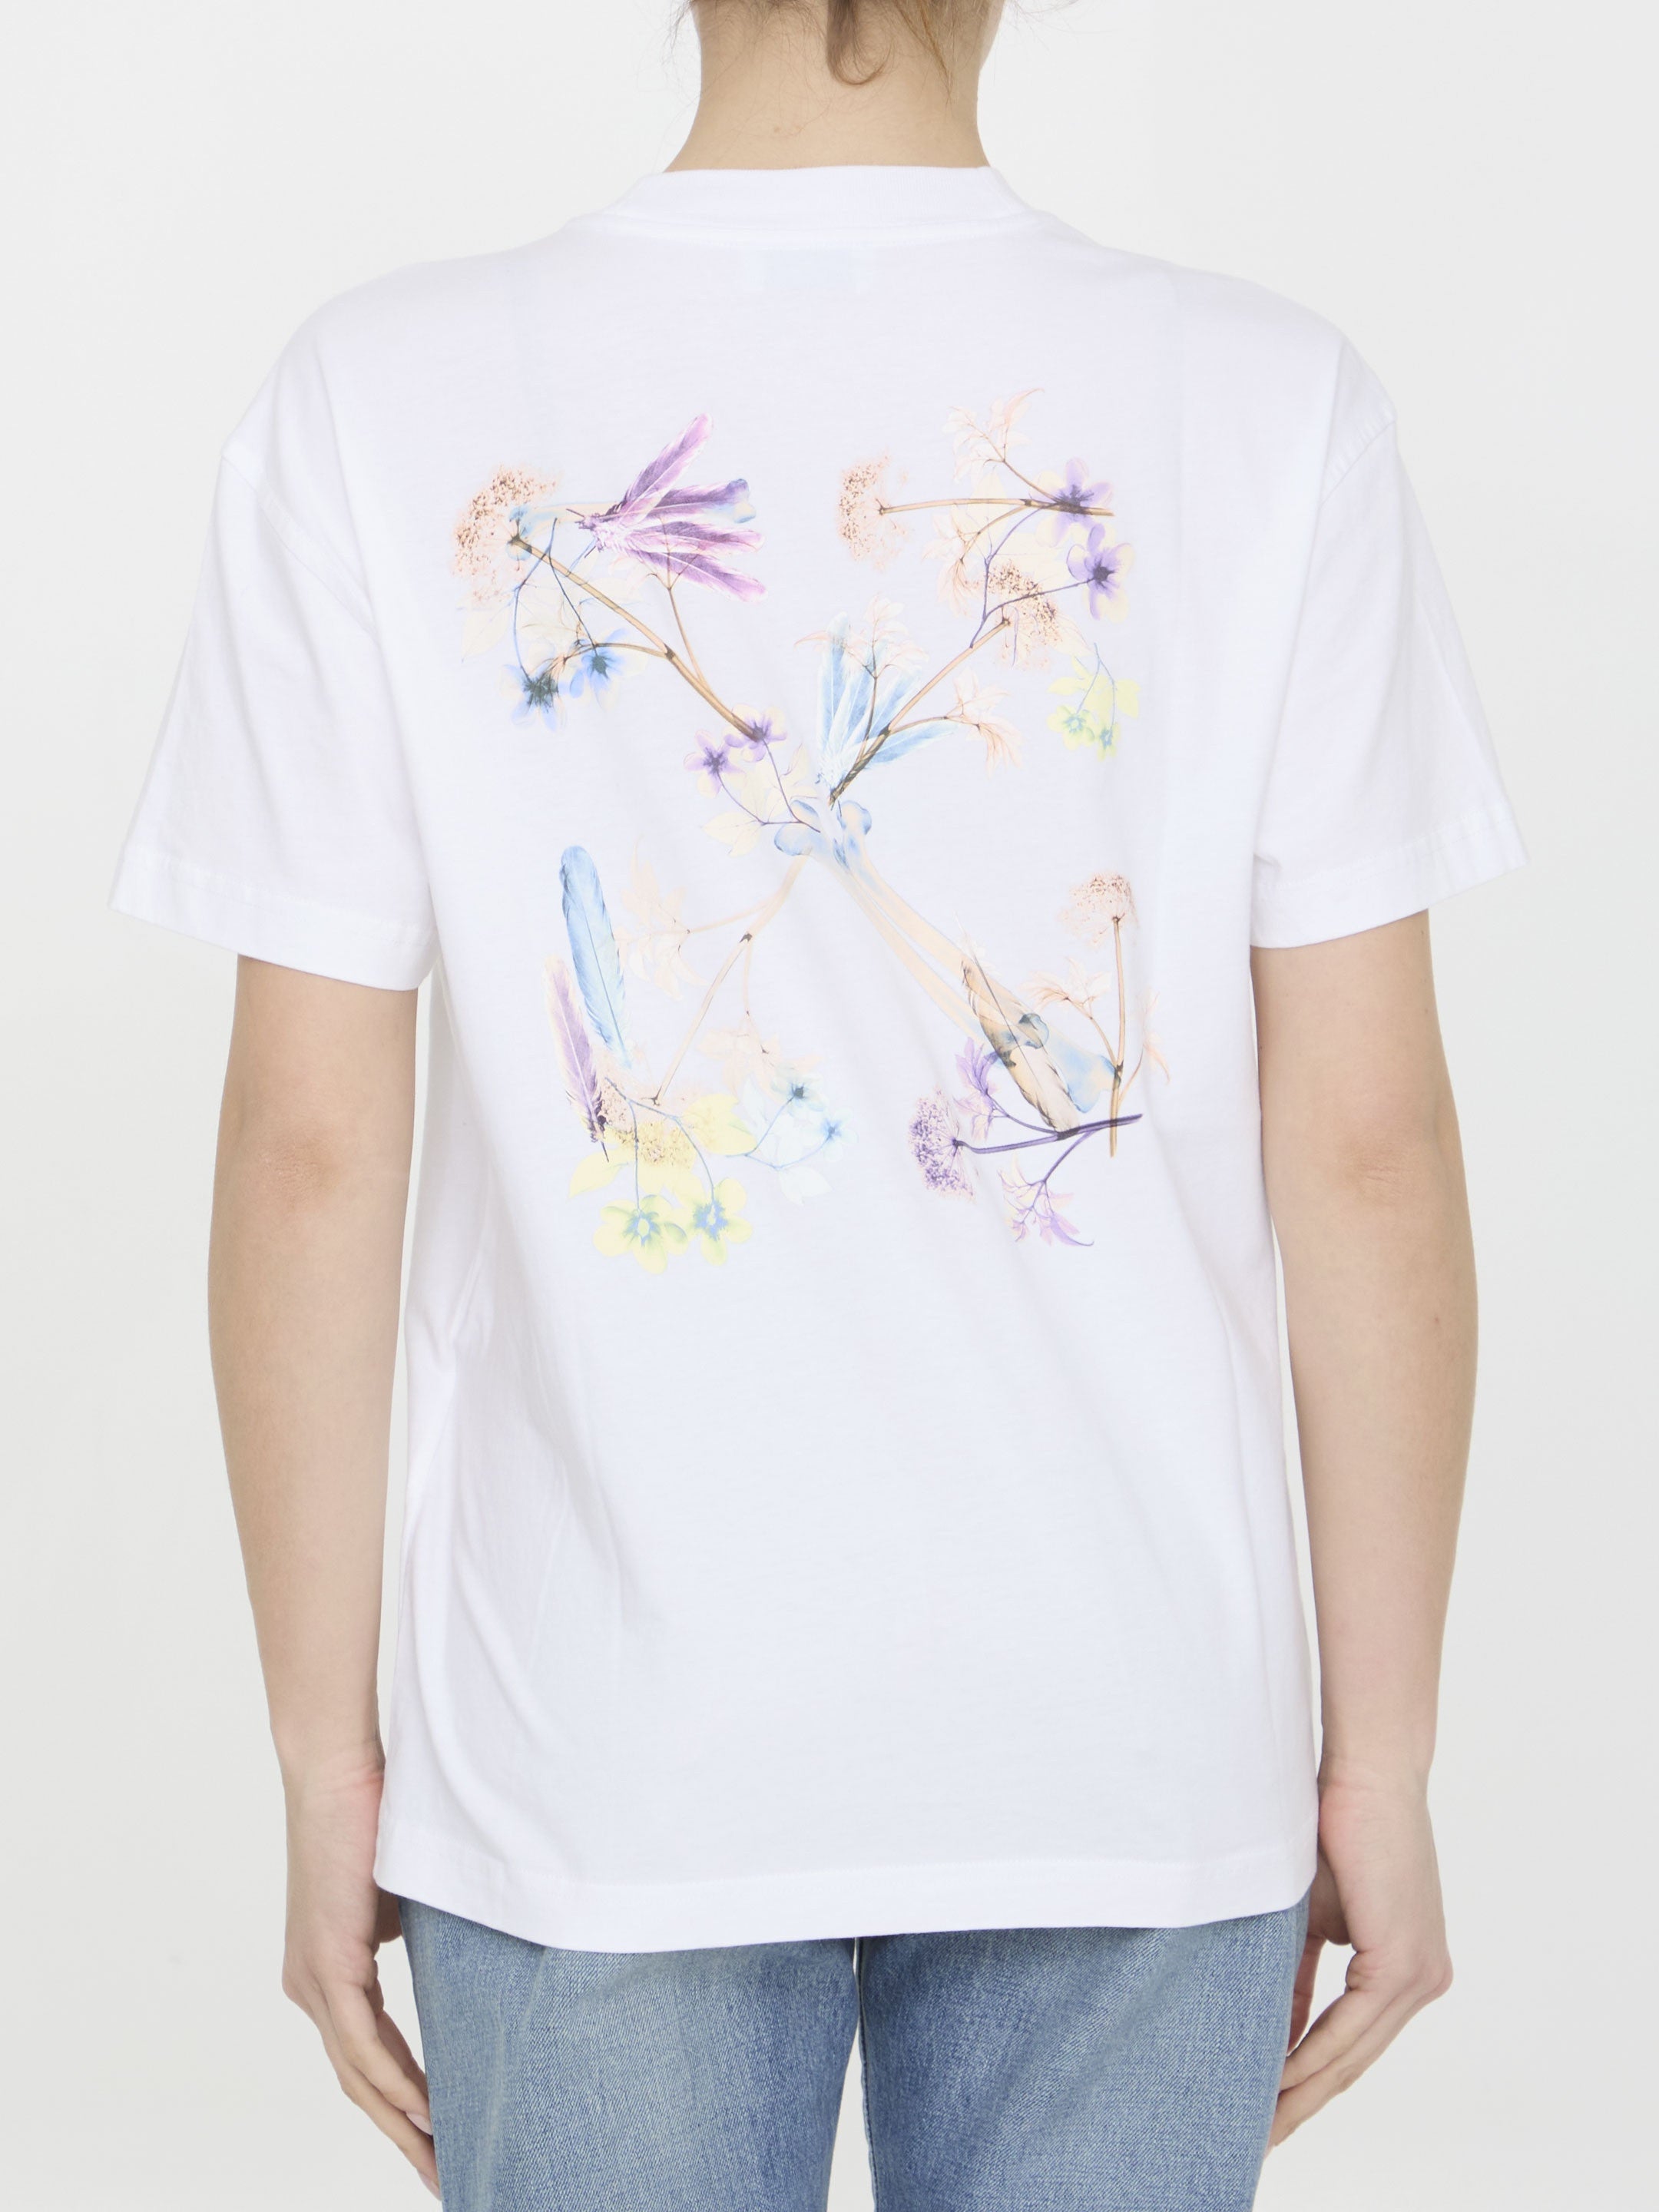 OFF-WHITE-OUTLET-SALE-Arrow-X-Ray-motif-t-shirt-Shirts-ARCHIVE-COLLECTION-4.jpg